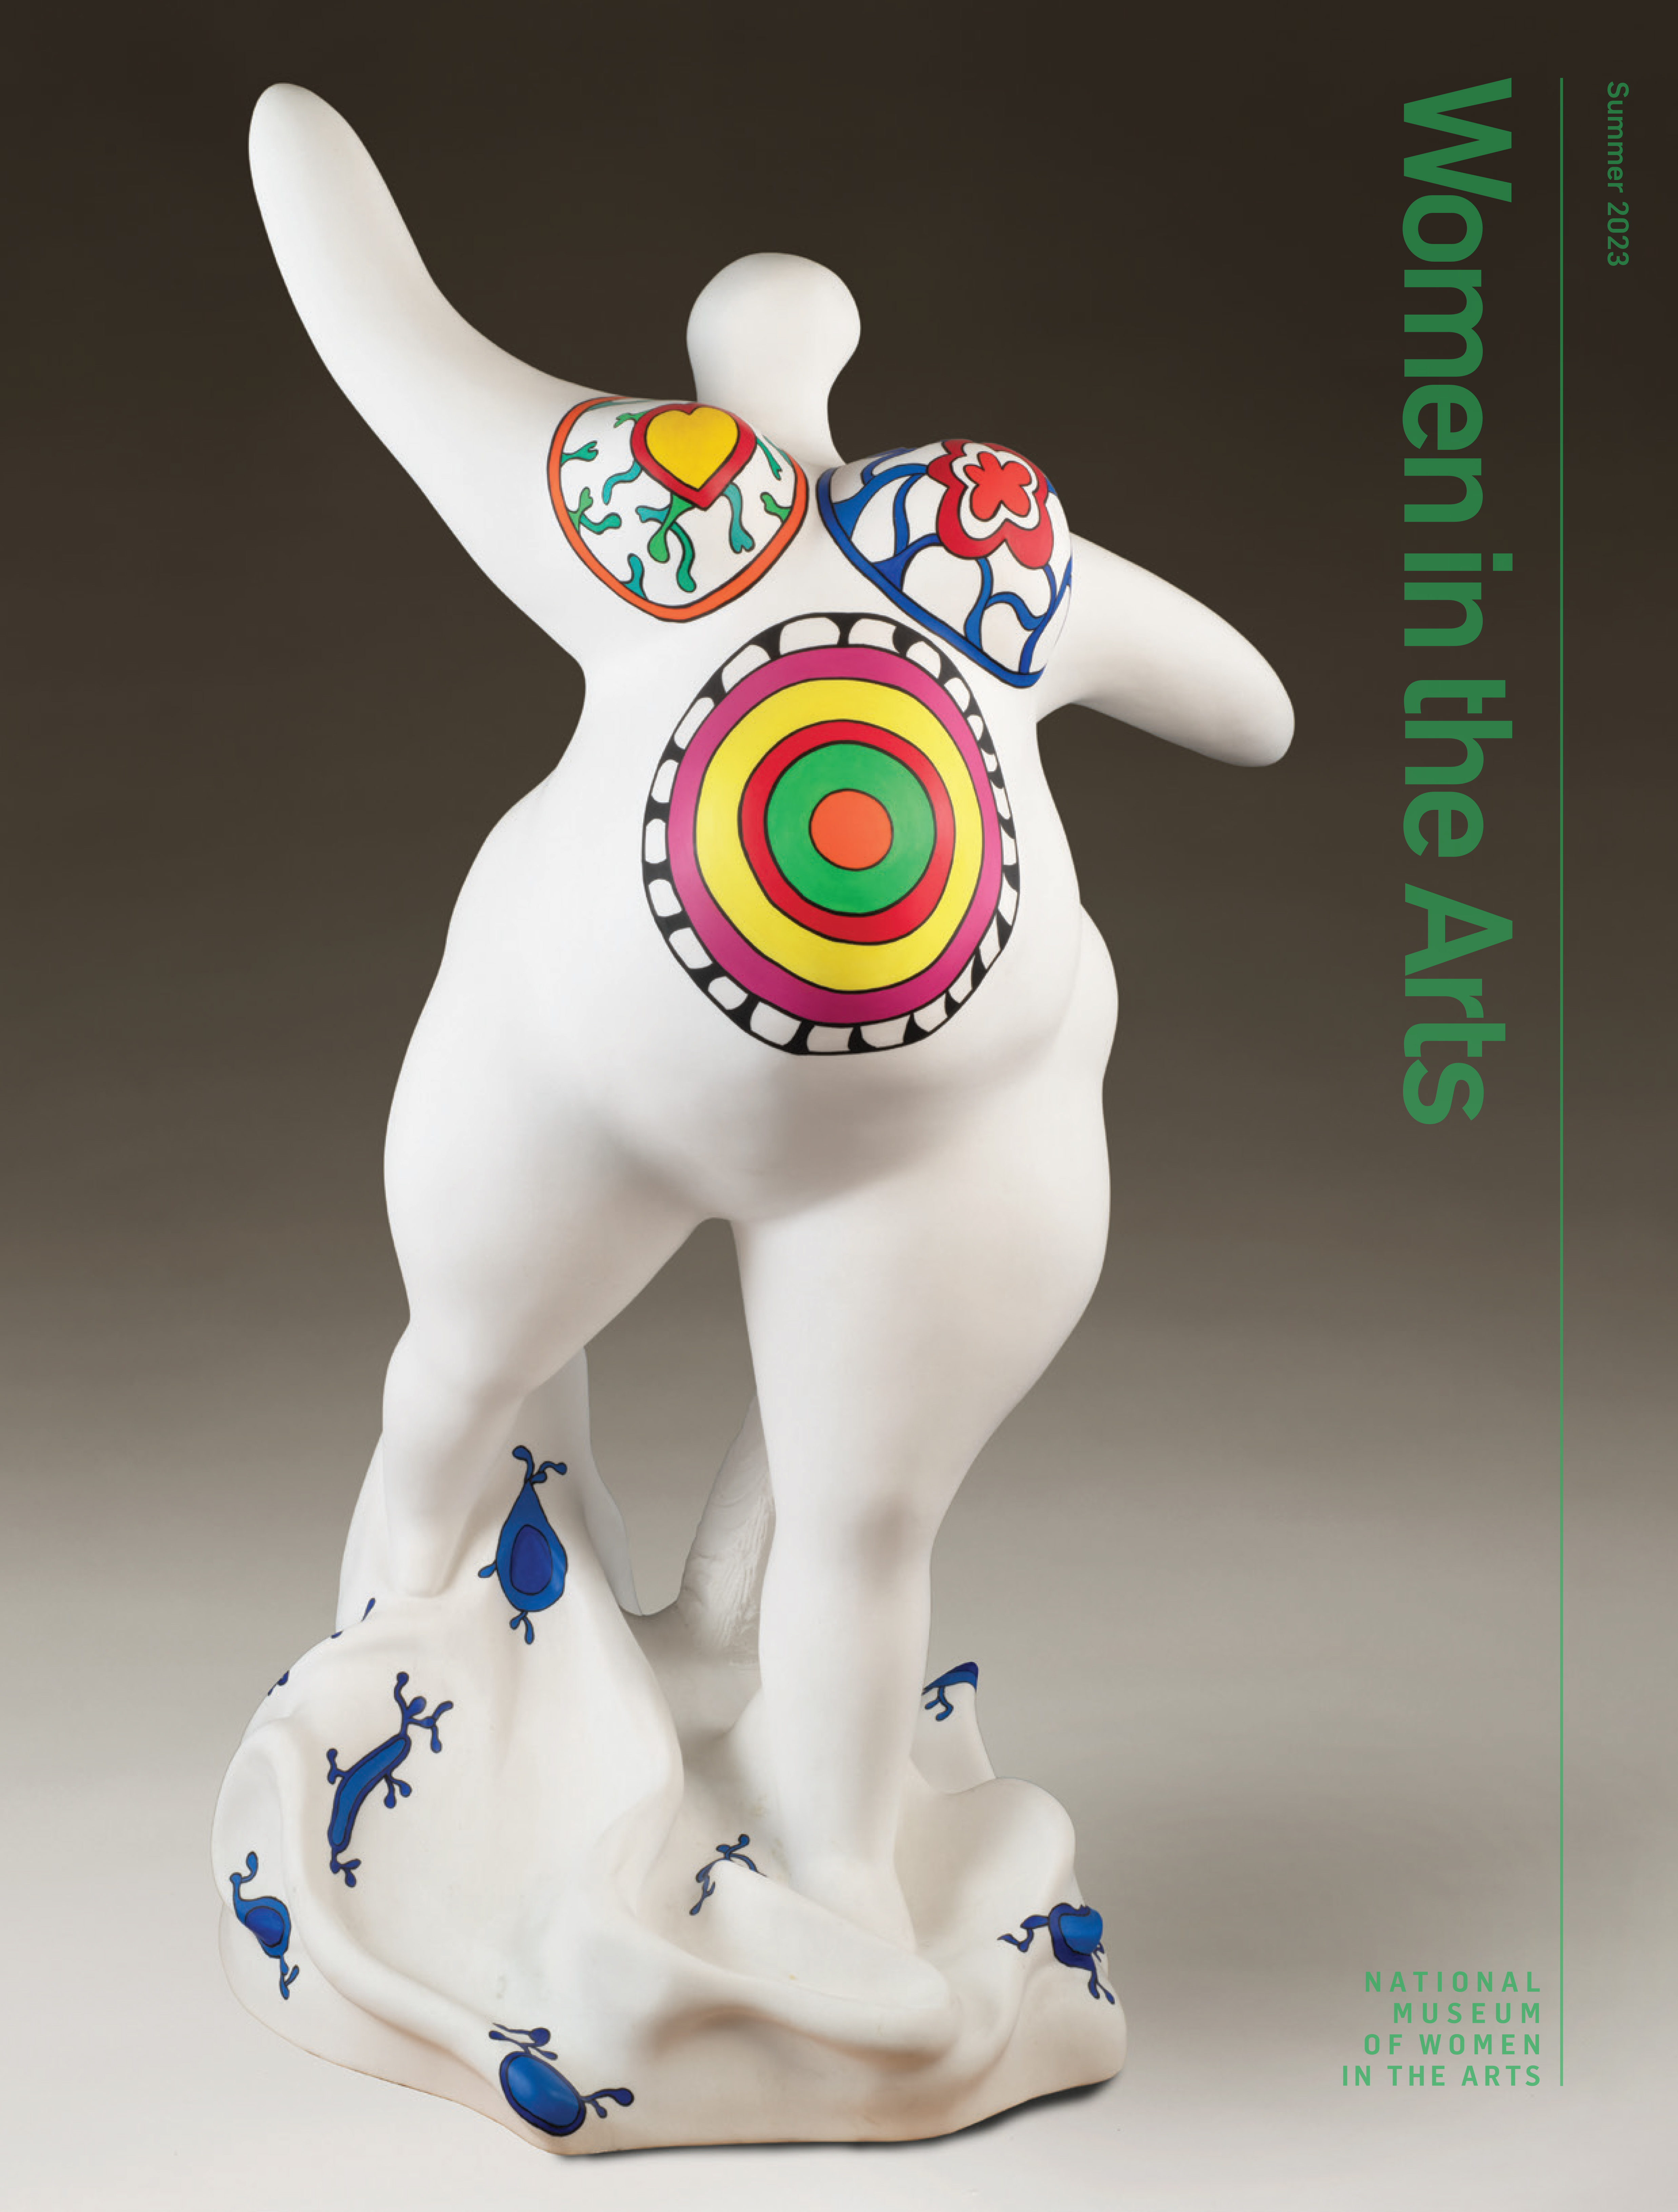 A magazine cover with an image of a marble Niki de Saint Phalle sculpture depicting an abstracted, voluptuous figure with a pregnant belly. The figure is covered in bright patterns and posed stepping forward, with raised, outstretched arms.